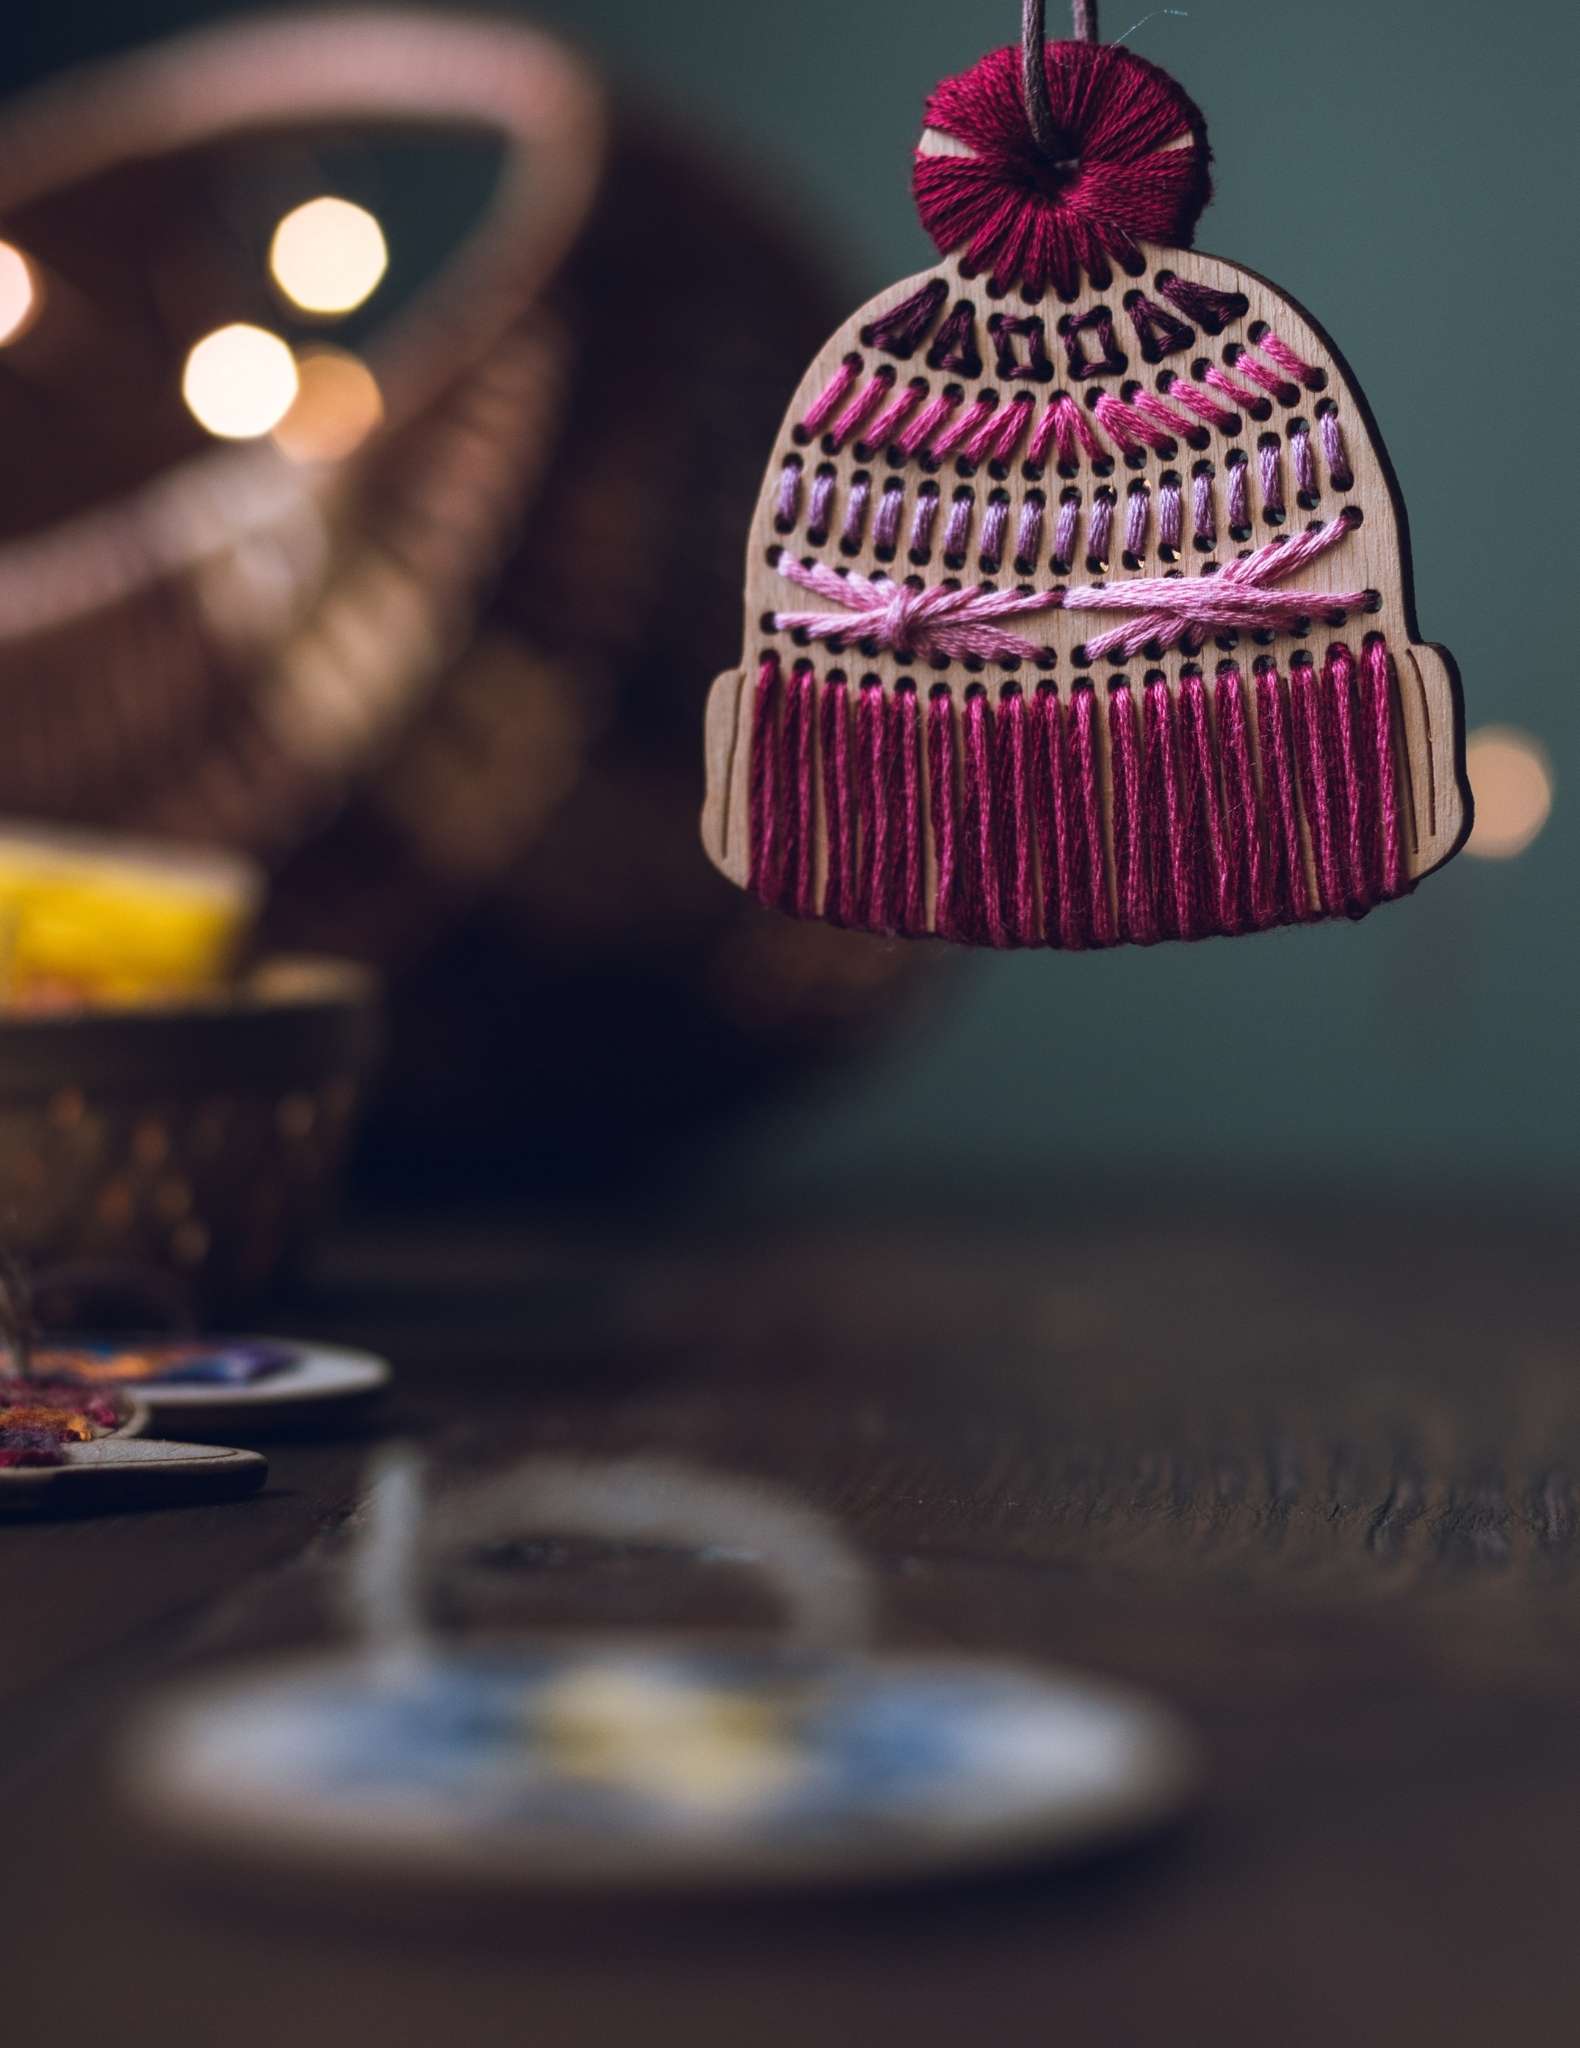 A close up of a wooden ornament shaped like a knitted hat with pom pom, stitched with pink threads.